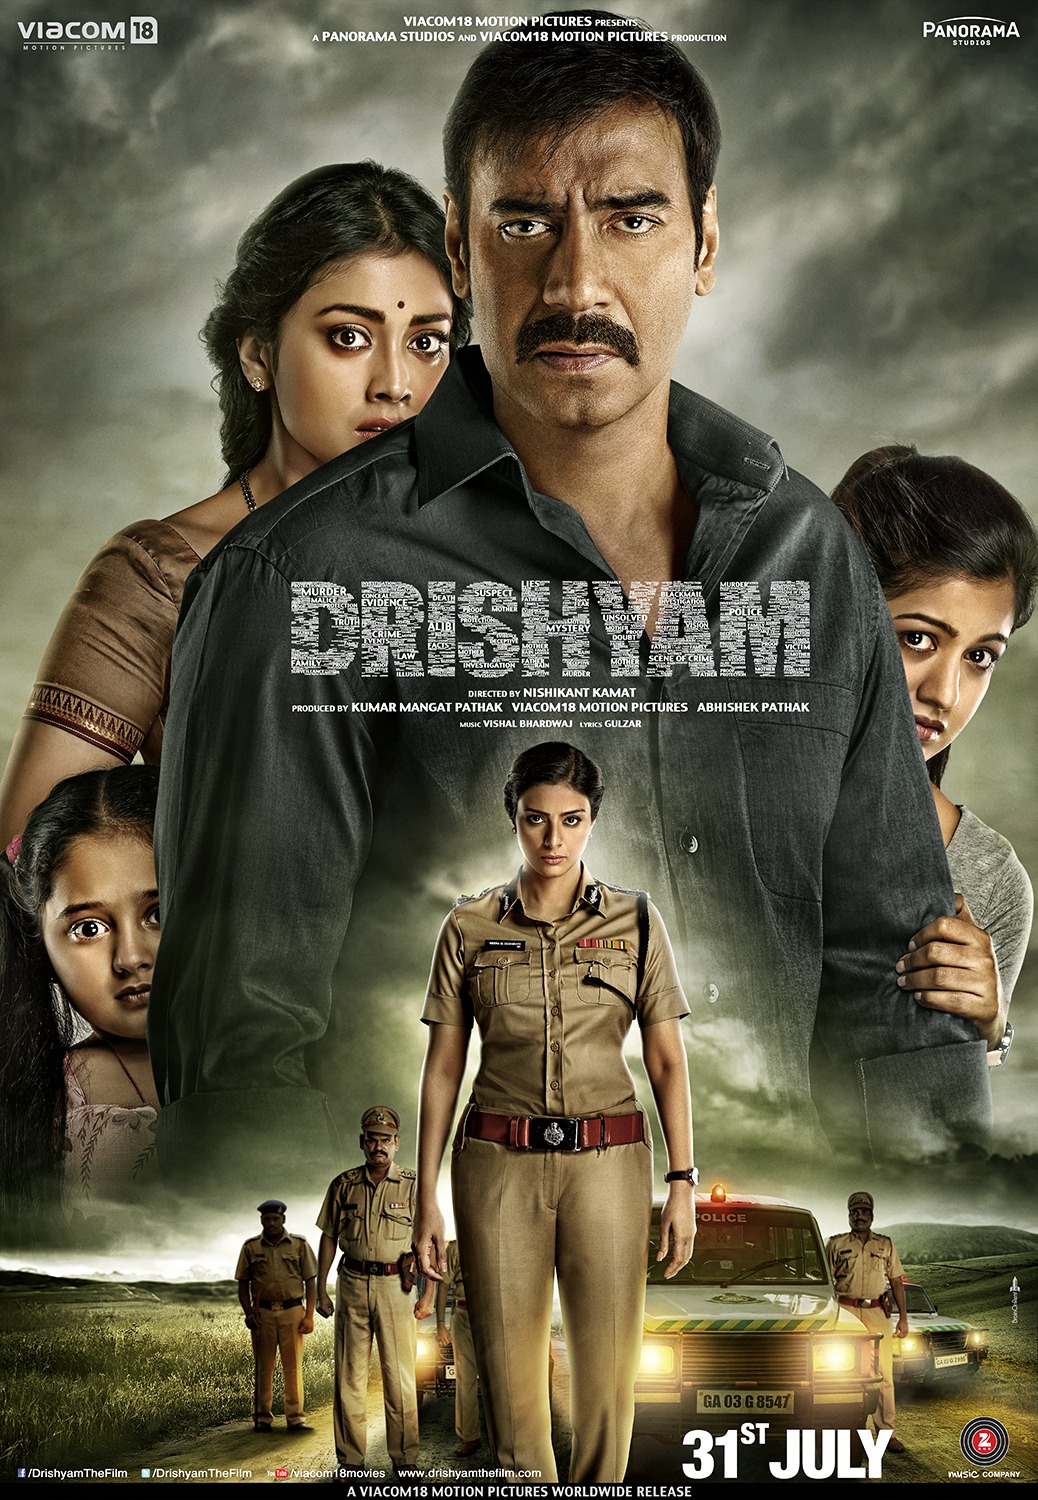 Extra Large Movie Poster Image for Drishyam (#2 of 2)